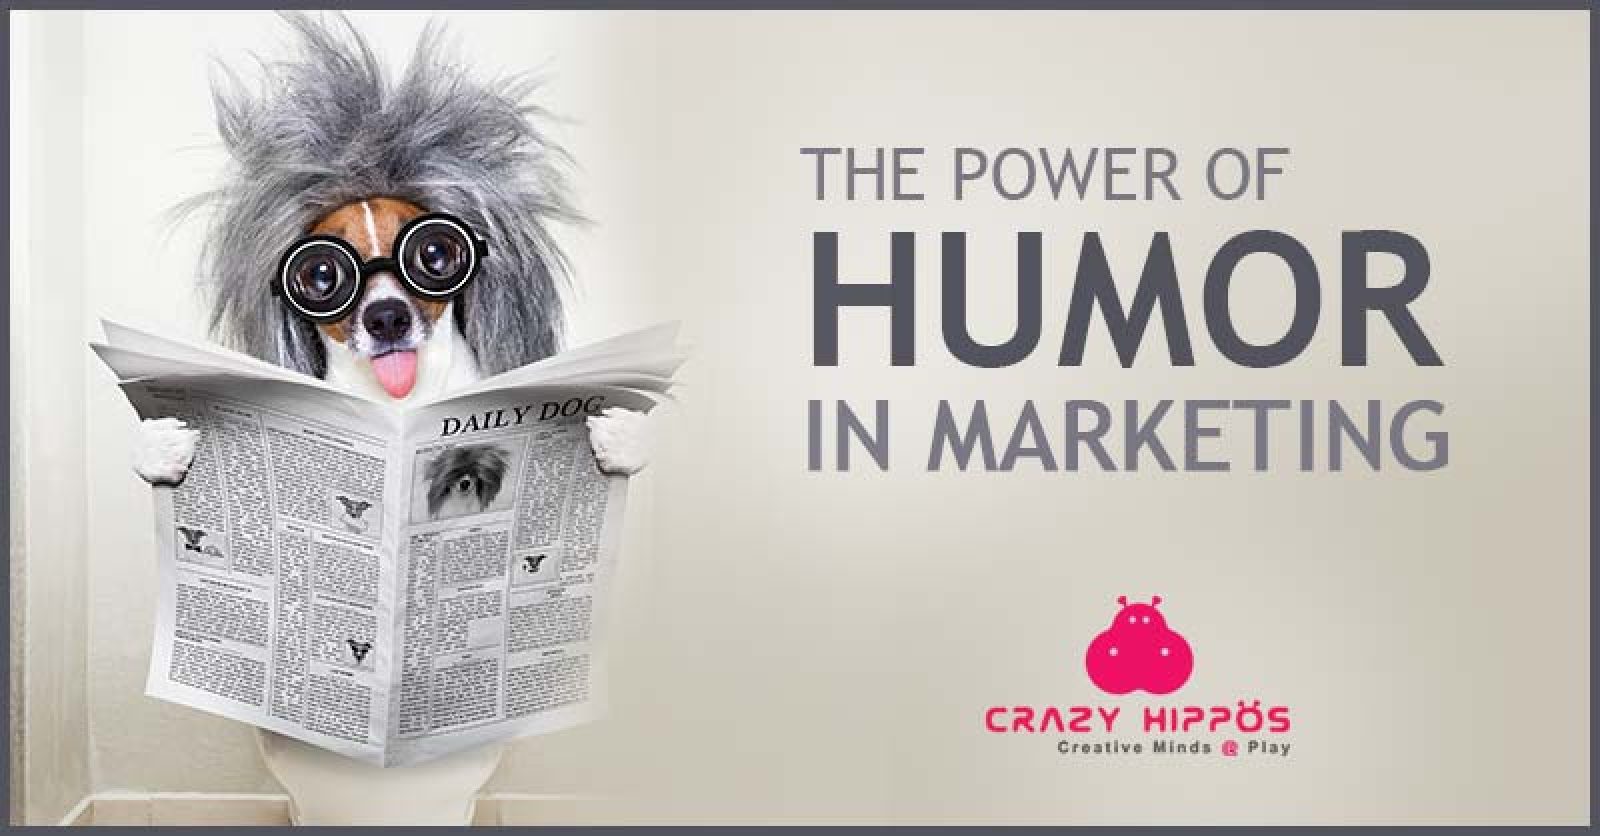 THE POWER OF HUMOR IN MARKETING